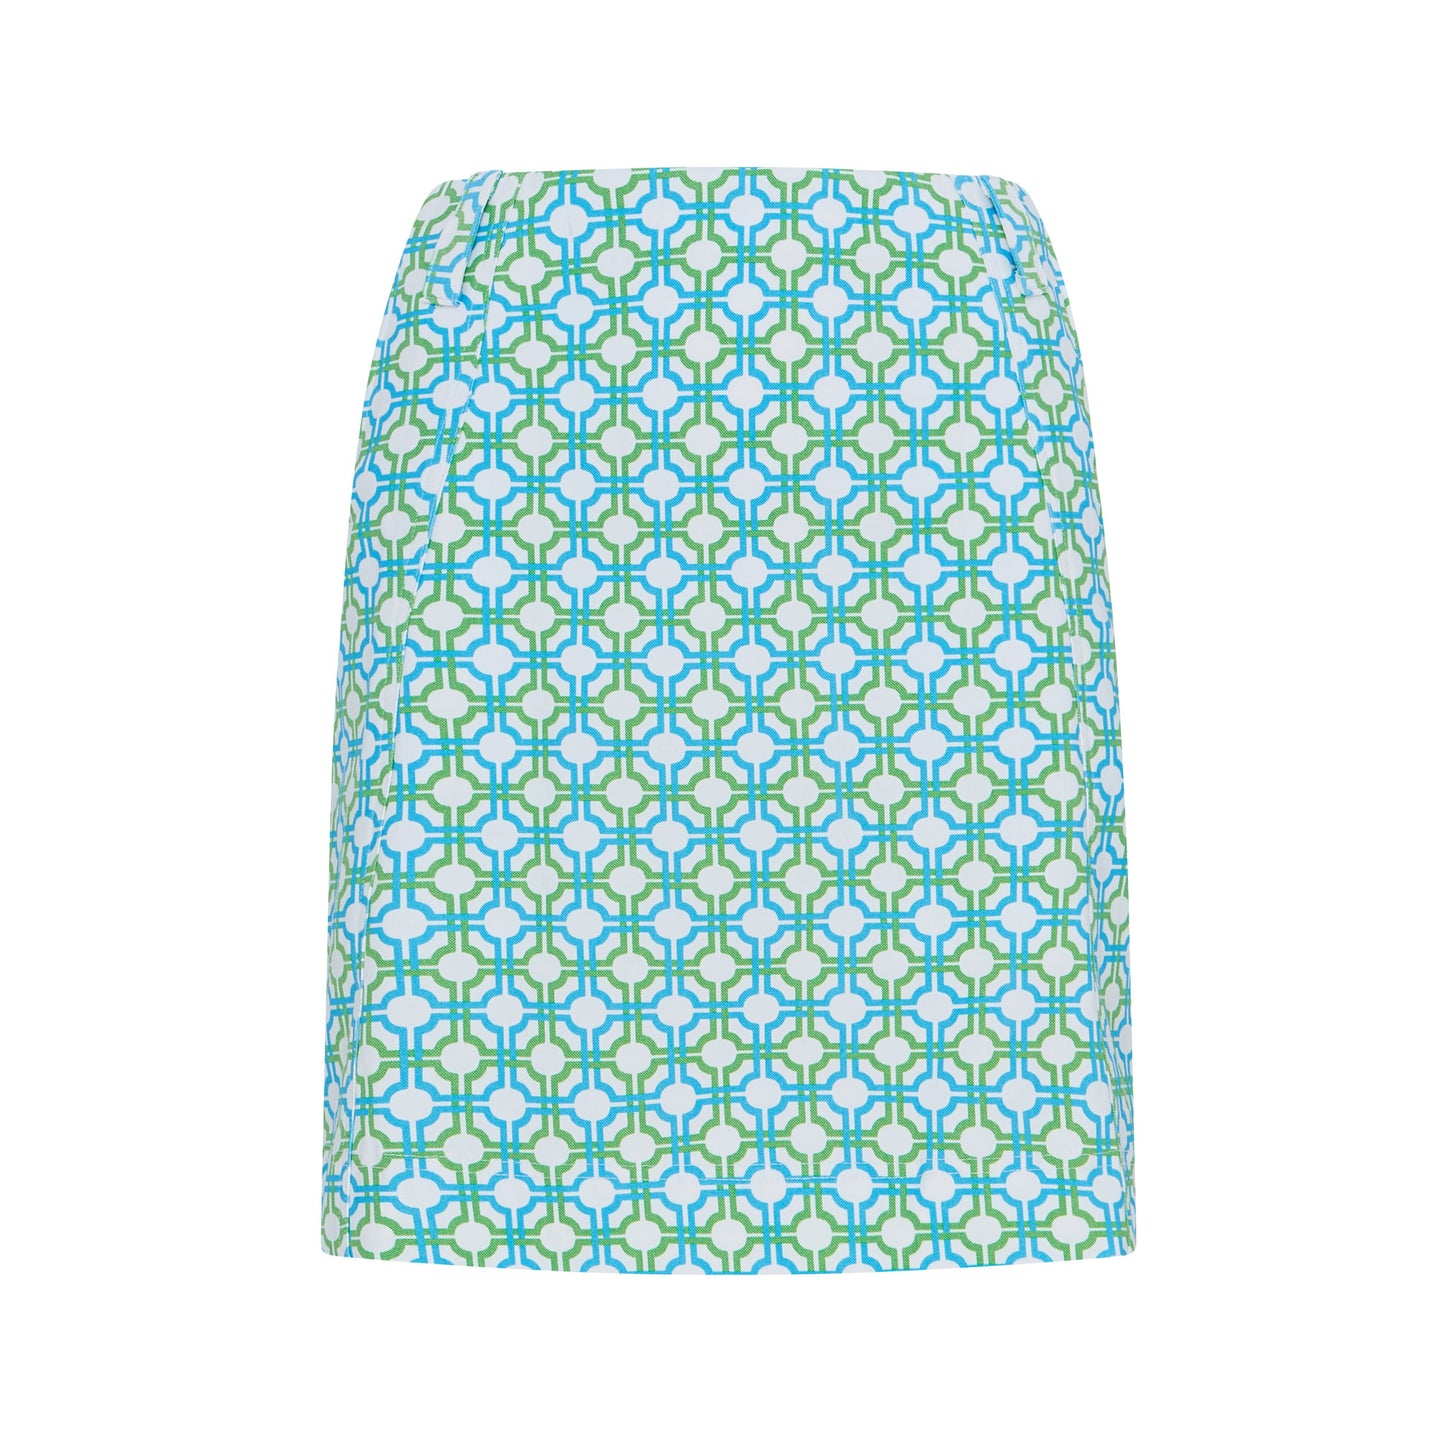 Swing Out Sister Women's Pull-On Skort in Dazzling Blue and Emerald Mosaic Pattern